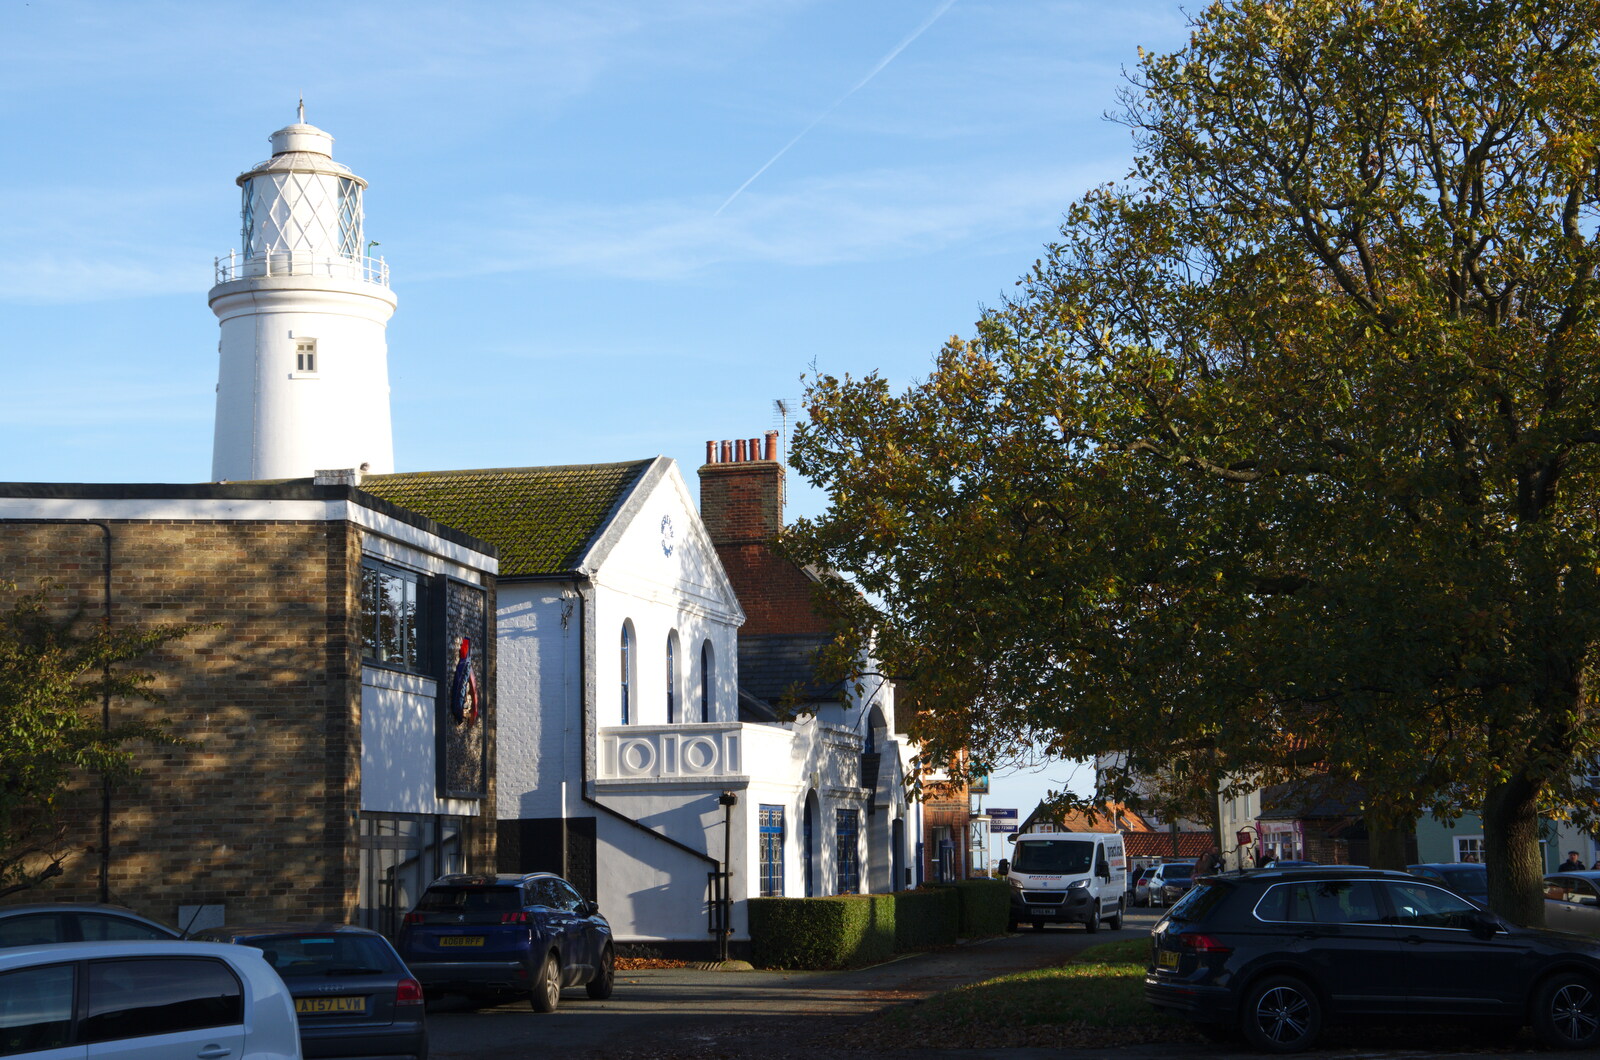 Looking back from outside Adnams' Brewery from A Trip up a Lighthouse, Southwold, Suffolk - 27th October 2019